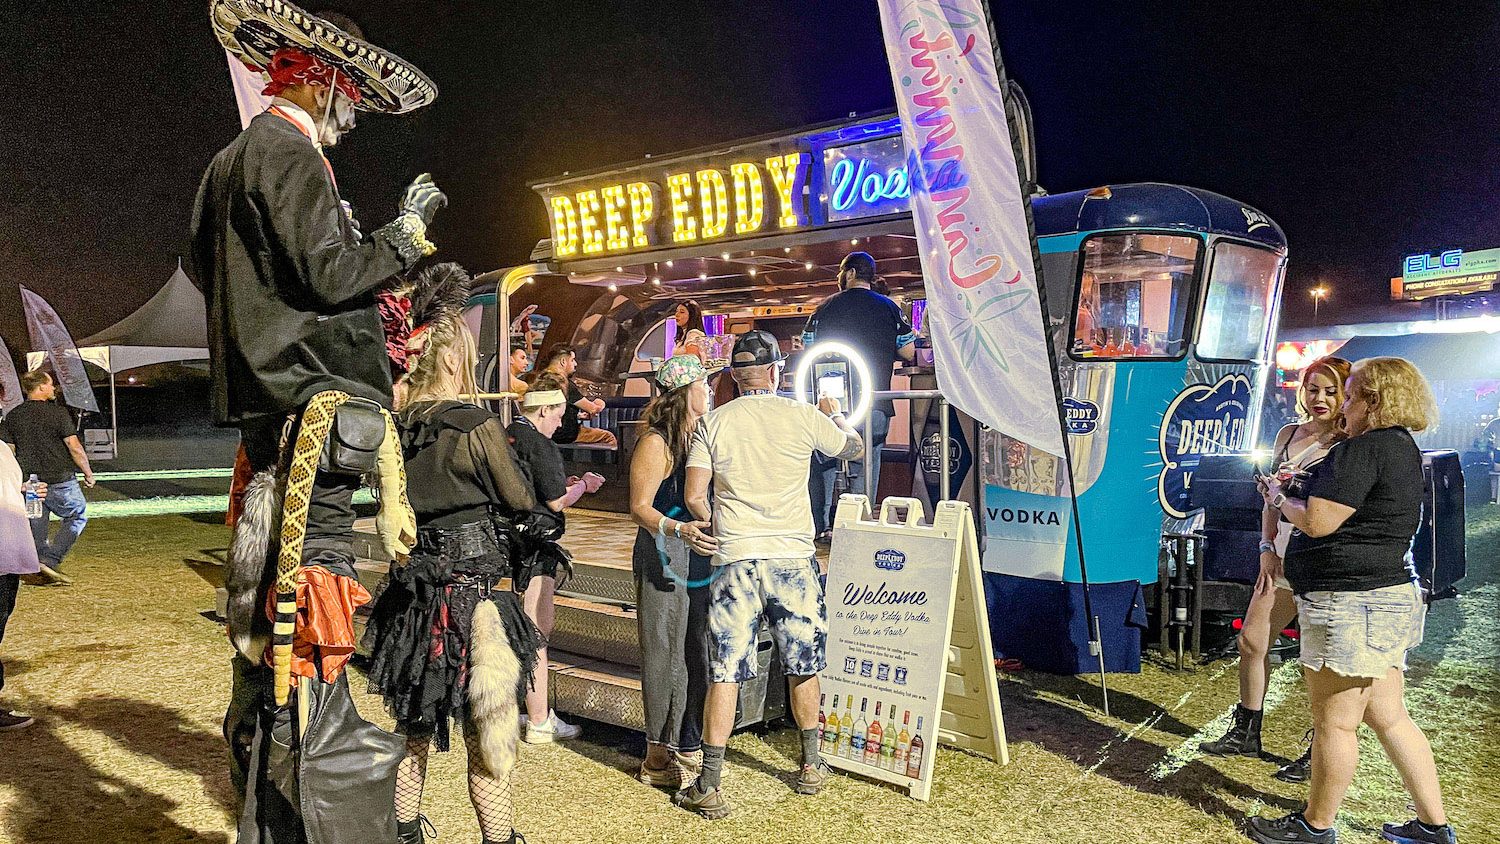 Deep Eddy Vodka's field marketing setup for festivals and activations